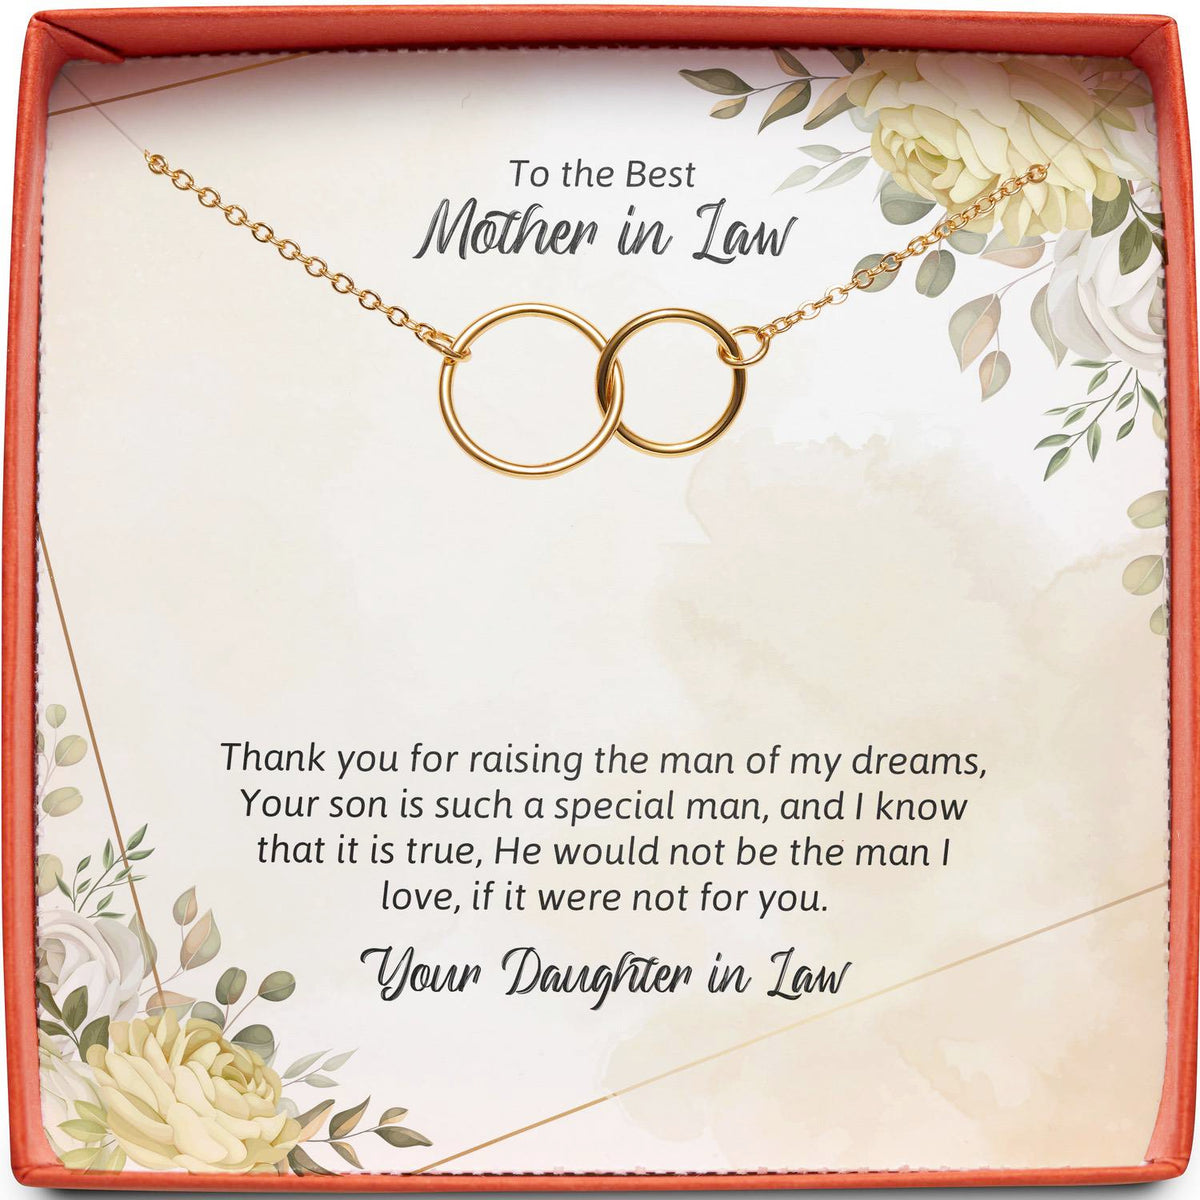 To the Best Mother in Law (From Daughter in Law) | Man of My Dreams | Interlocking Circles